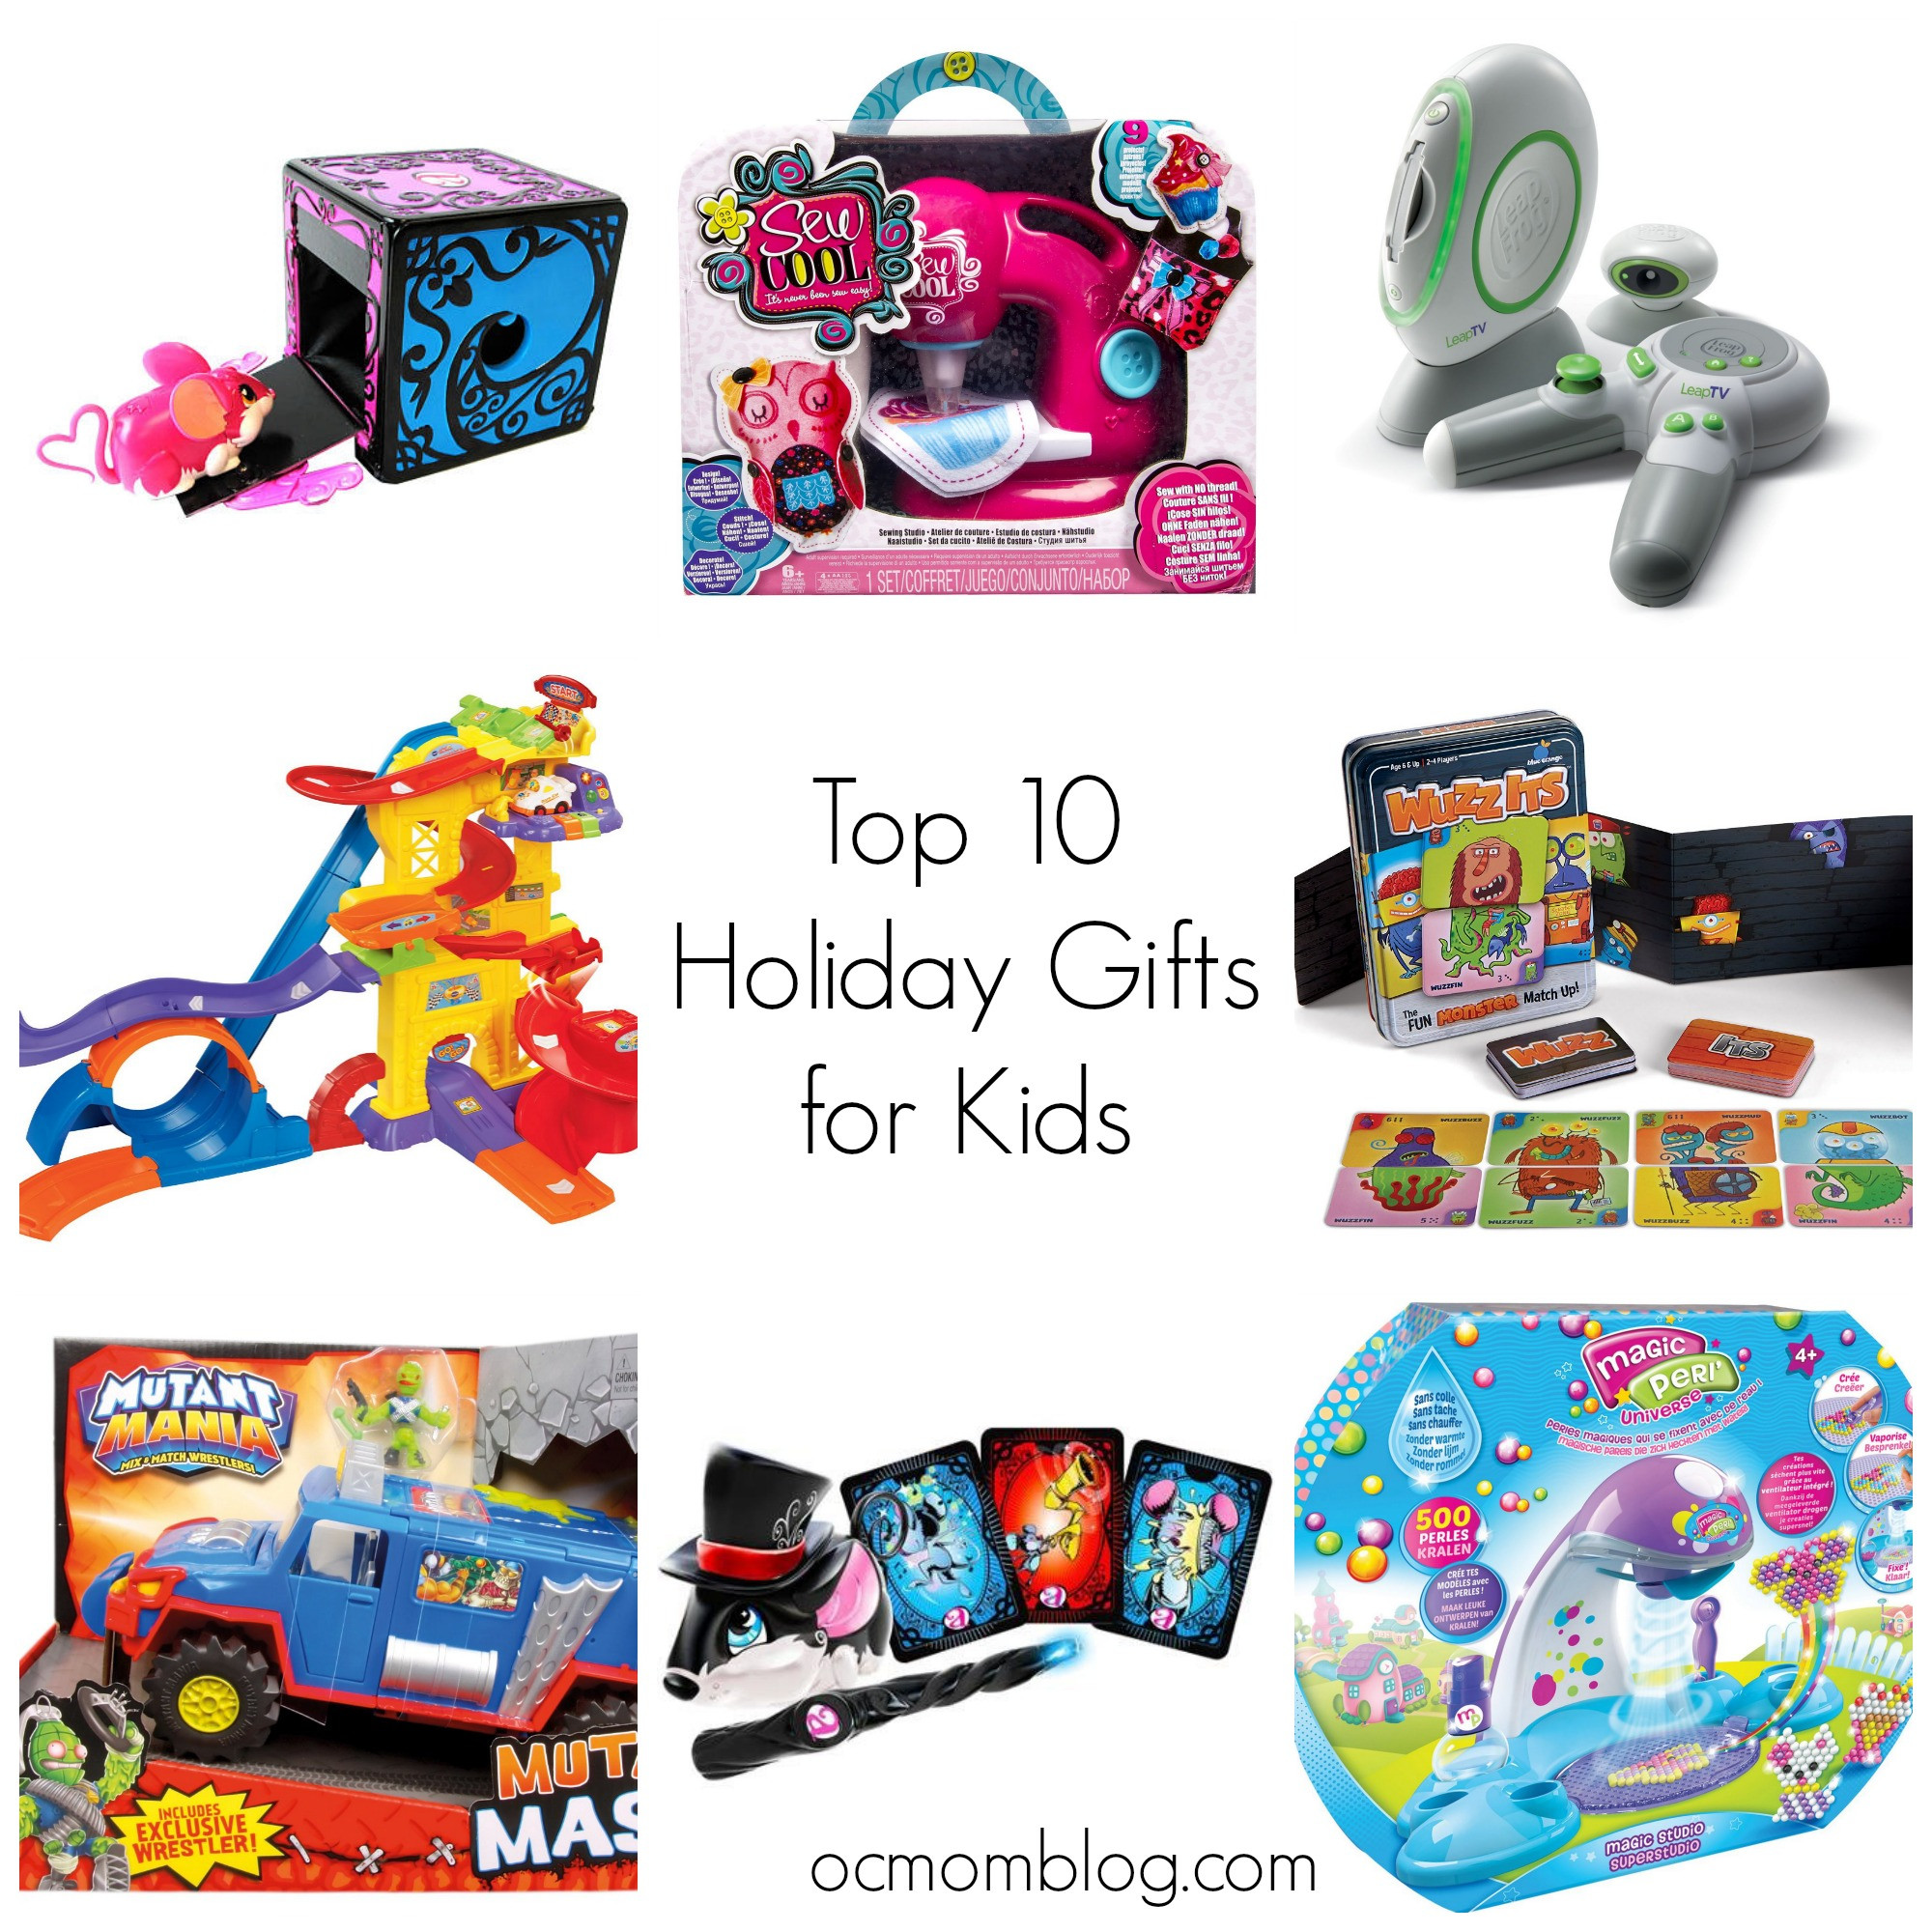 Top 10 Christmas Gifts For Kids
 Holiday Gift Guide Top 10 Gifts for Kids